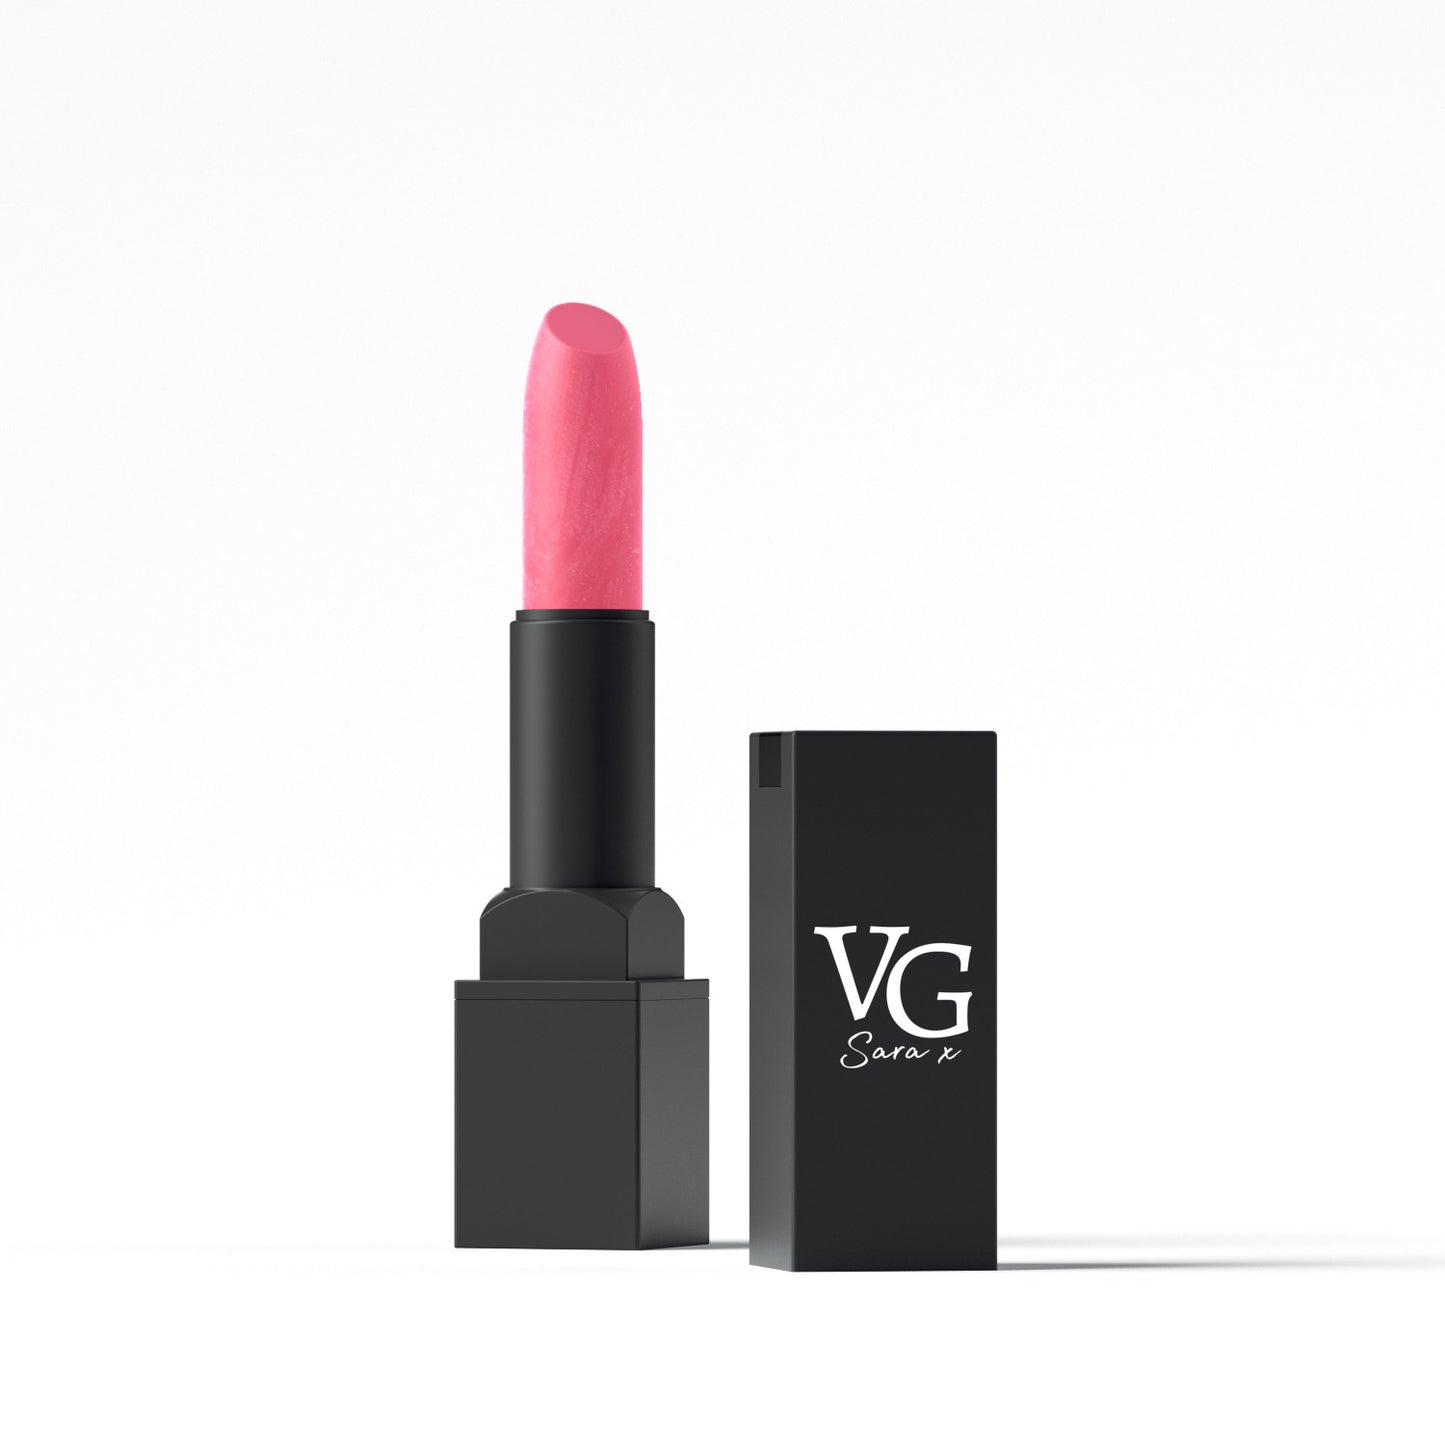 VG Cosmetics lipstick in its open form showing color